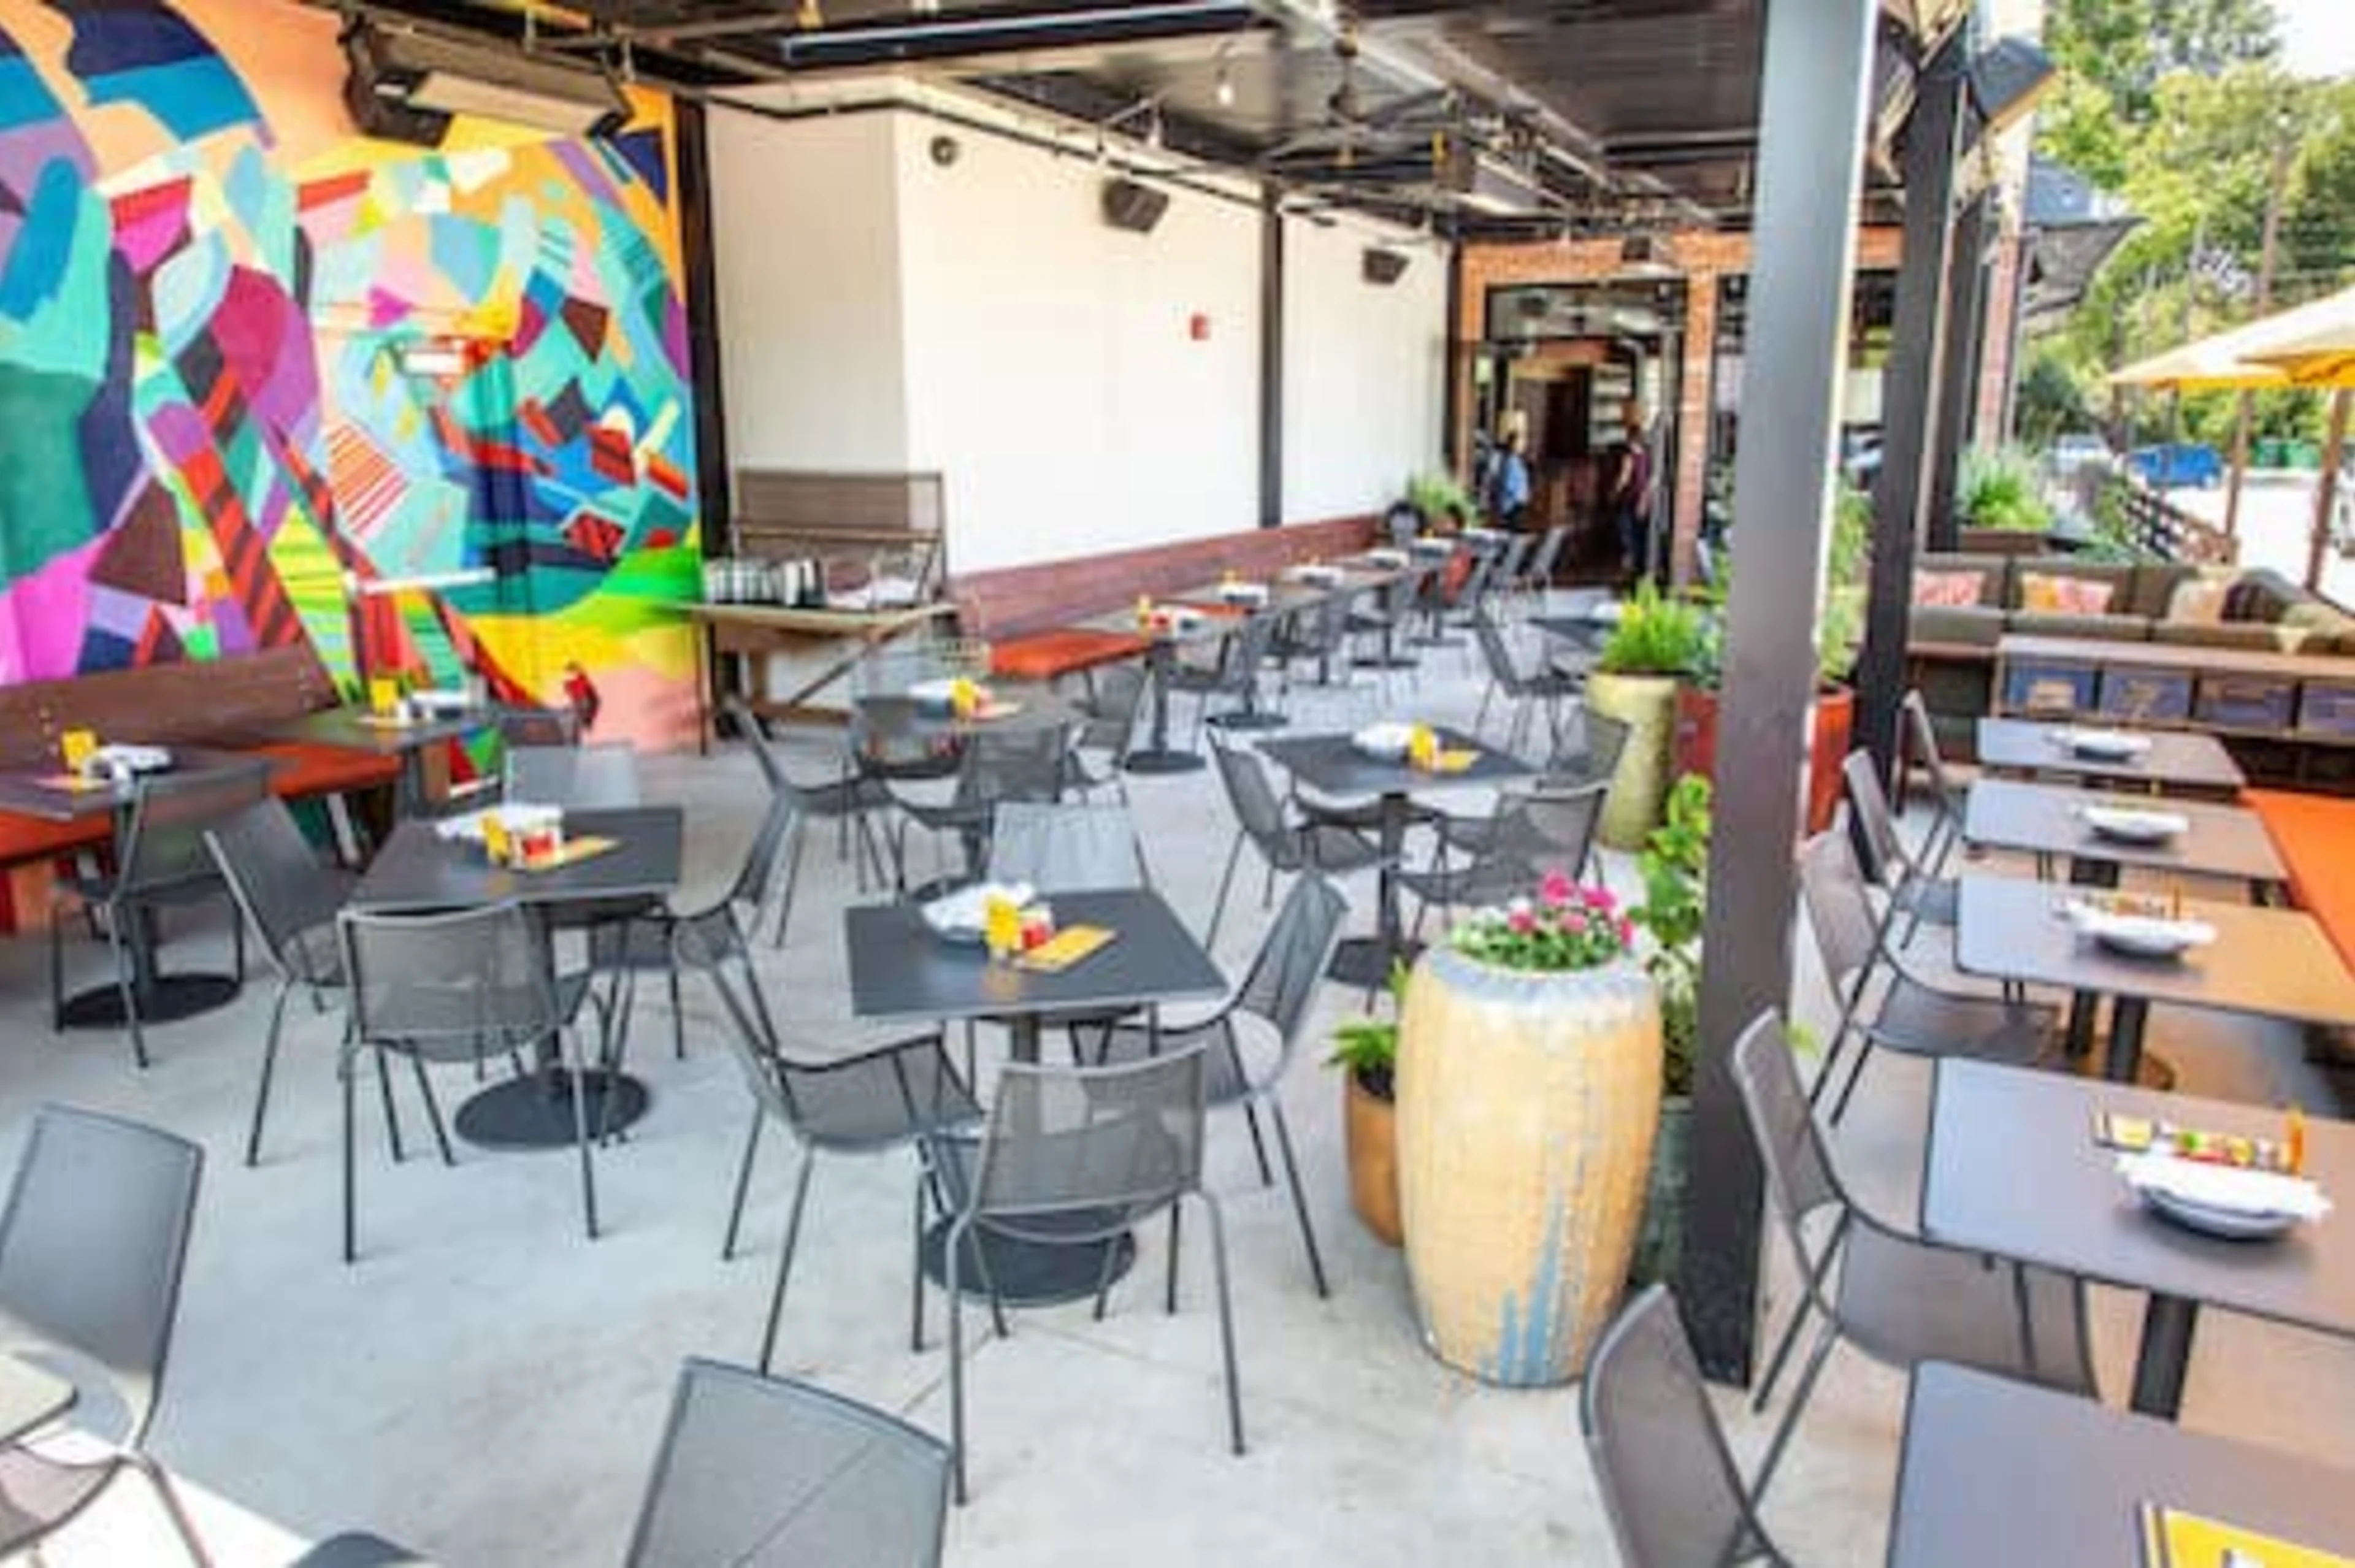 An empty patio with many tables and a colorful mural on the wall.